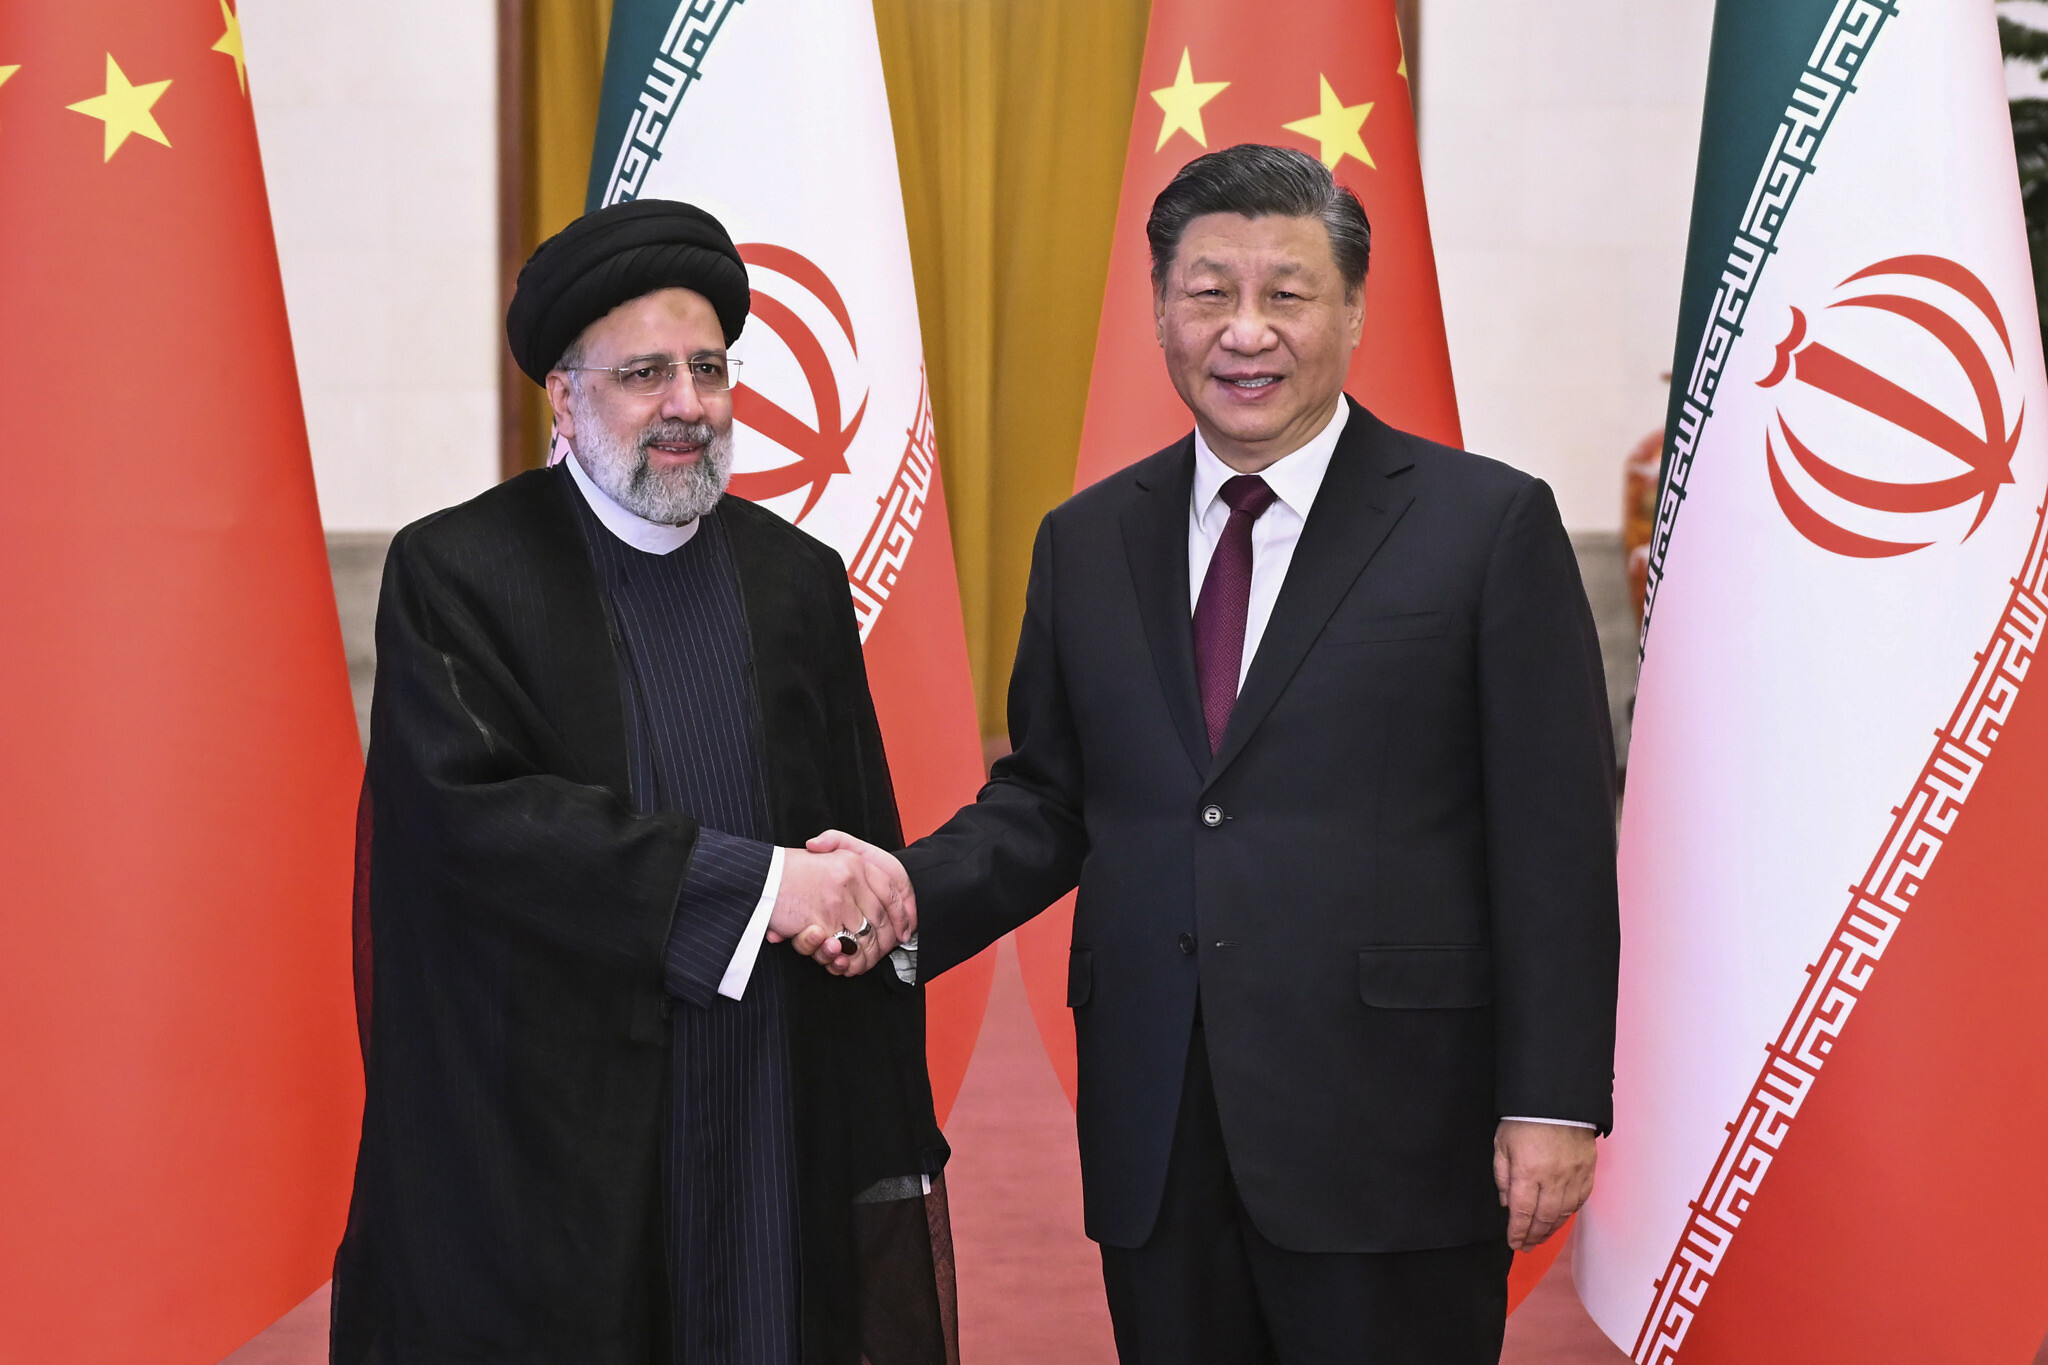 Iran and the Arab nations of the Persian Gulf will meet in China.